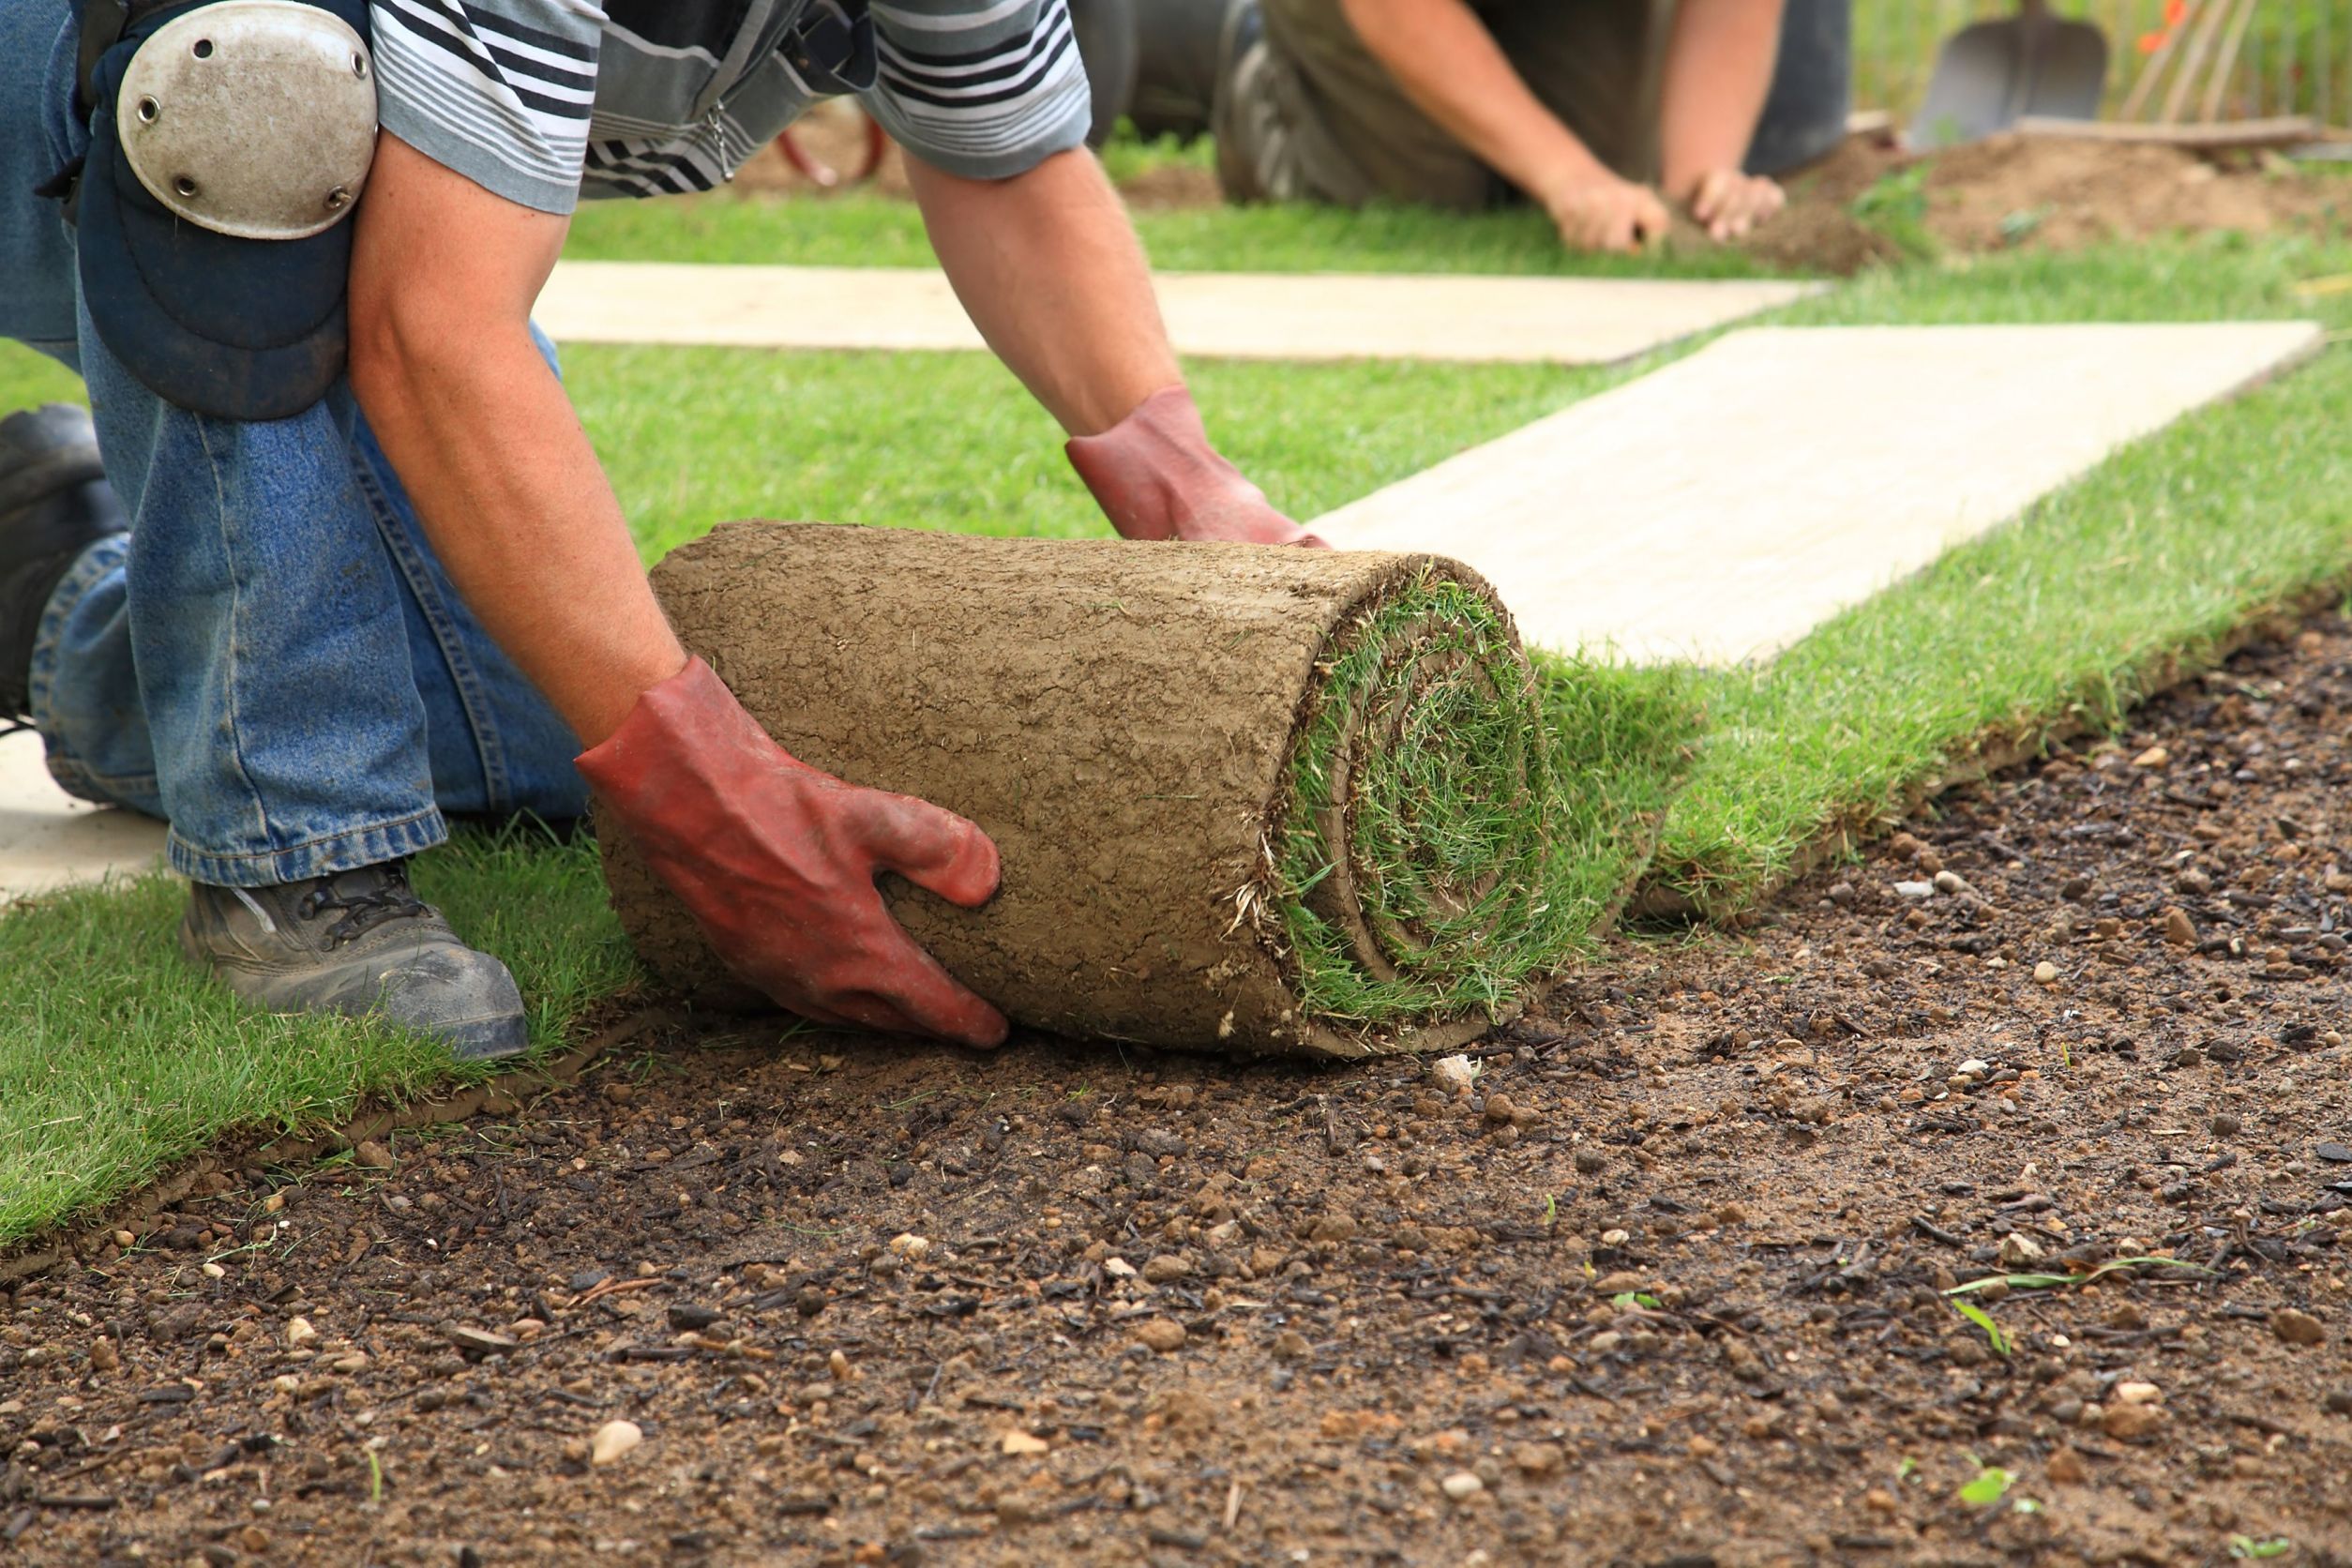 Instant Lawn Installers in Ashburn, VA Offer a Compelling Alternative to Seed